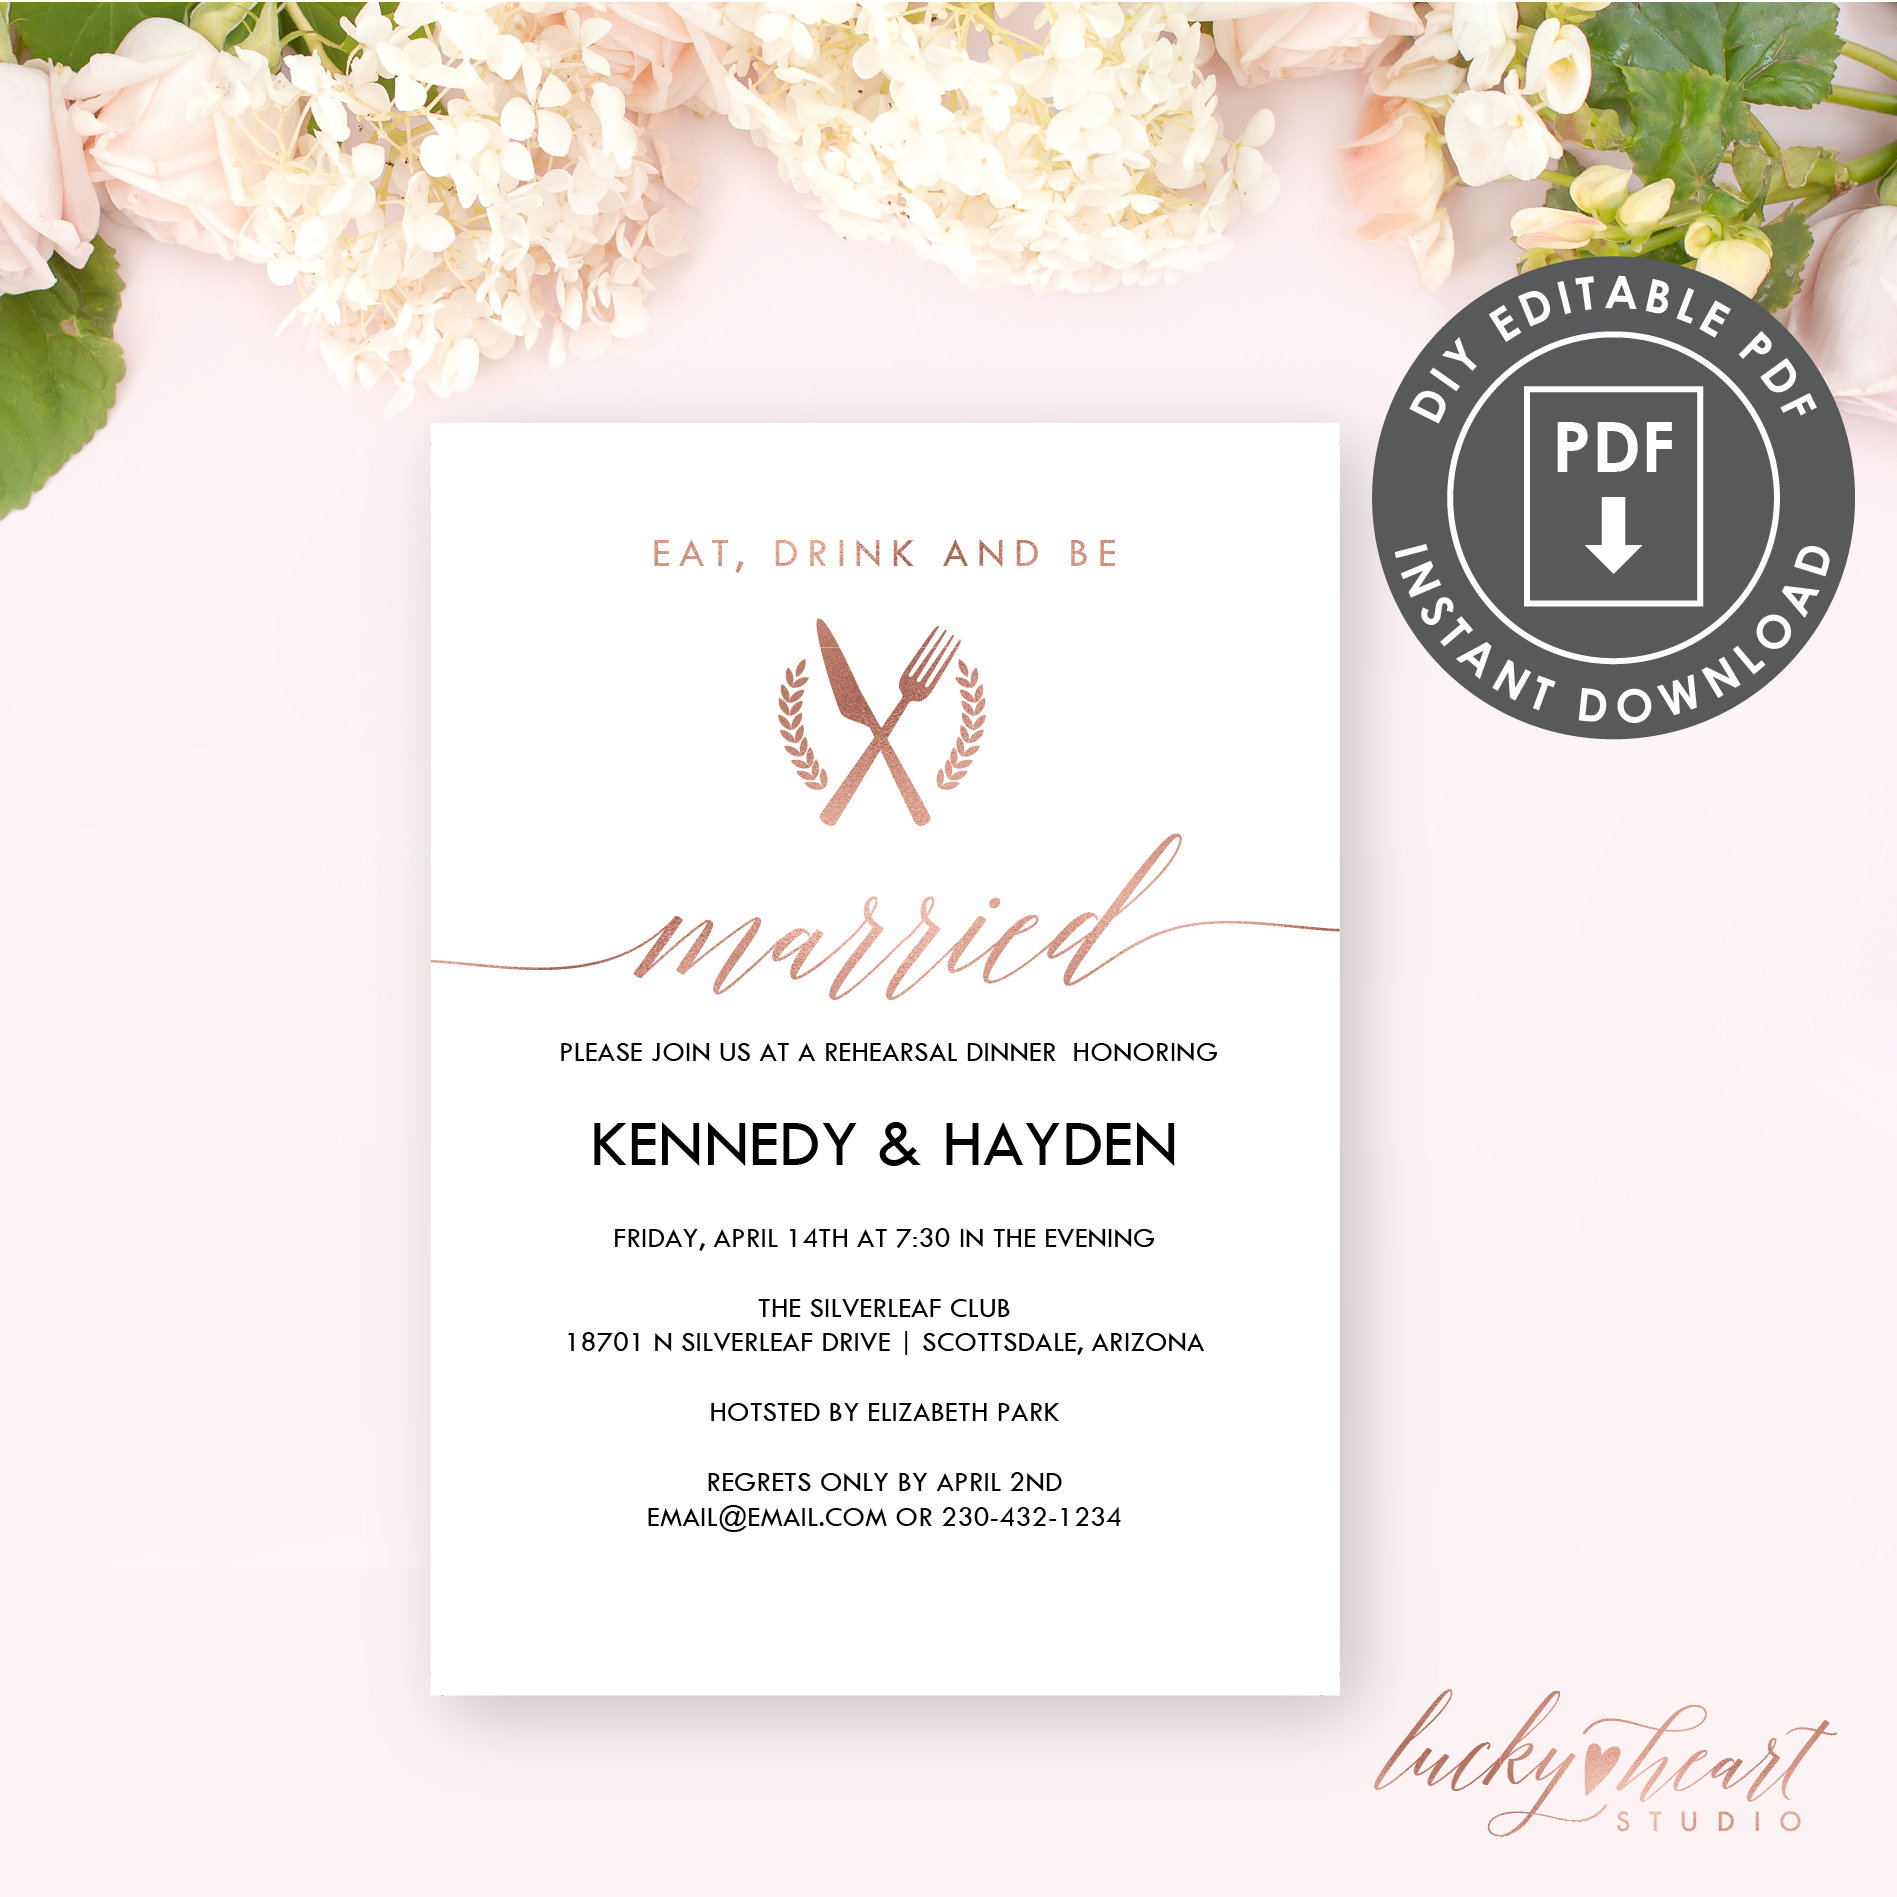 Wedding Rehearsal Dinner Template Fully Editable Instant Download Eat Drink and Be Married Printable Rehearsal Invitation for Wedding